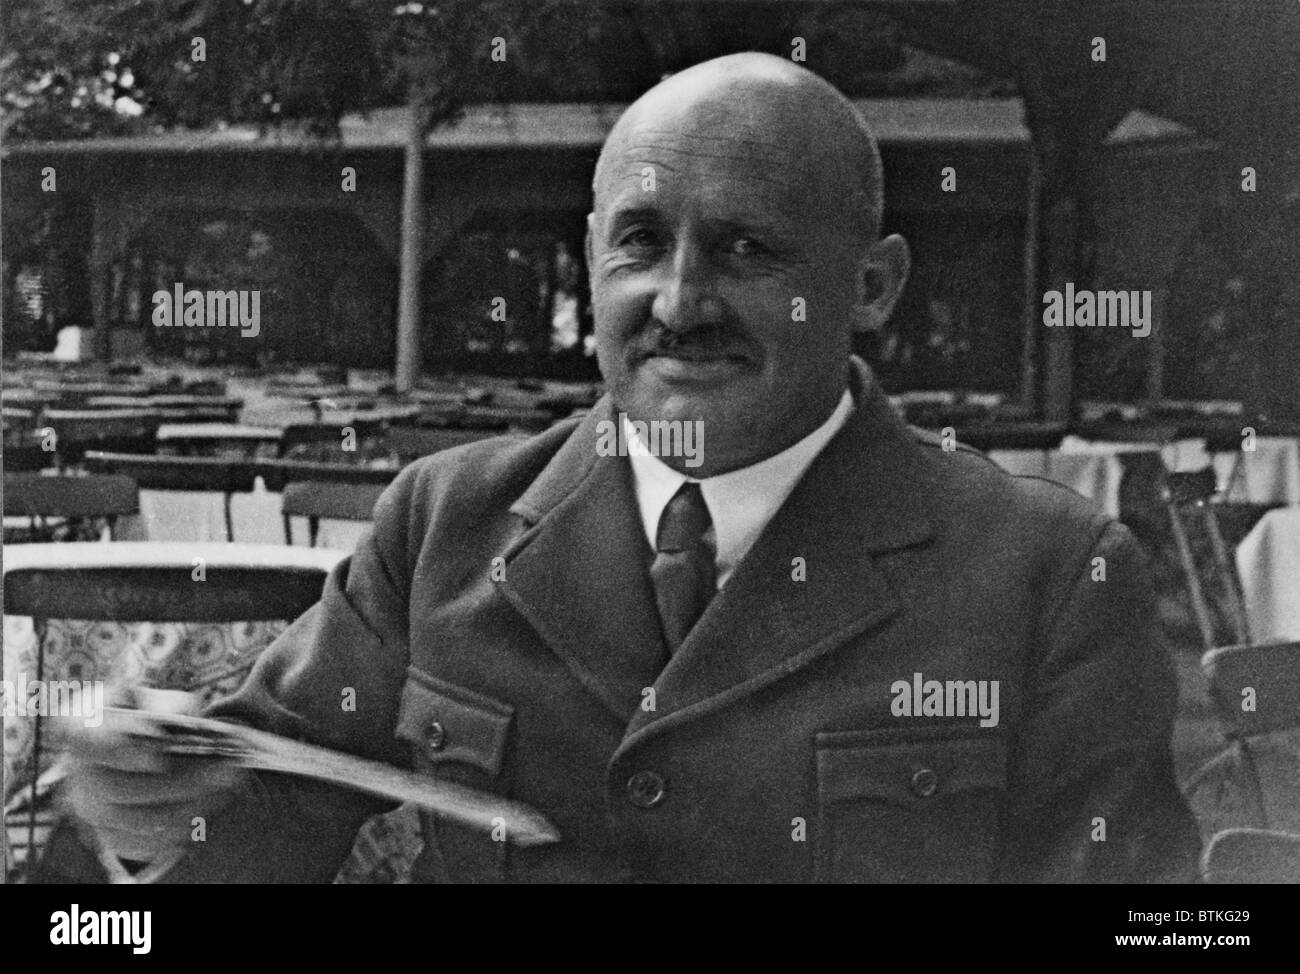 Julius Streicher (1885-1946), Nazi official and founder and publisher of DER STURMER newspaper, an anti-Semitic propaganda vehicle for the Nazi Party. He was convicted of war crimes at the Nuremburg Trials and executed. 1942. Stock Photo